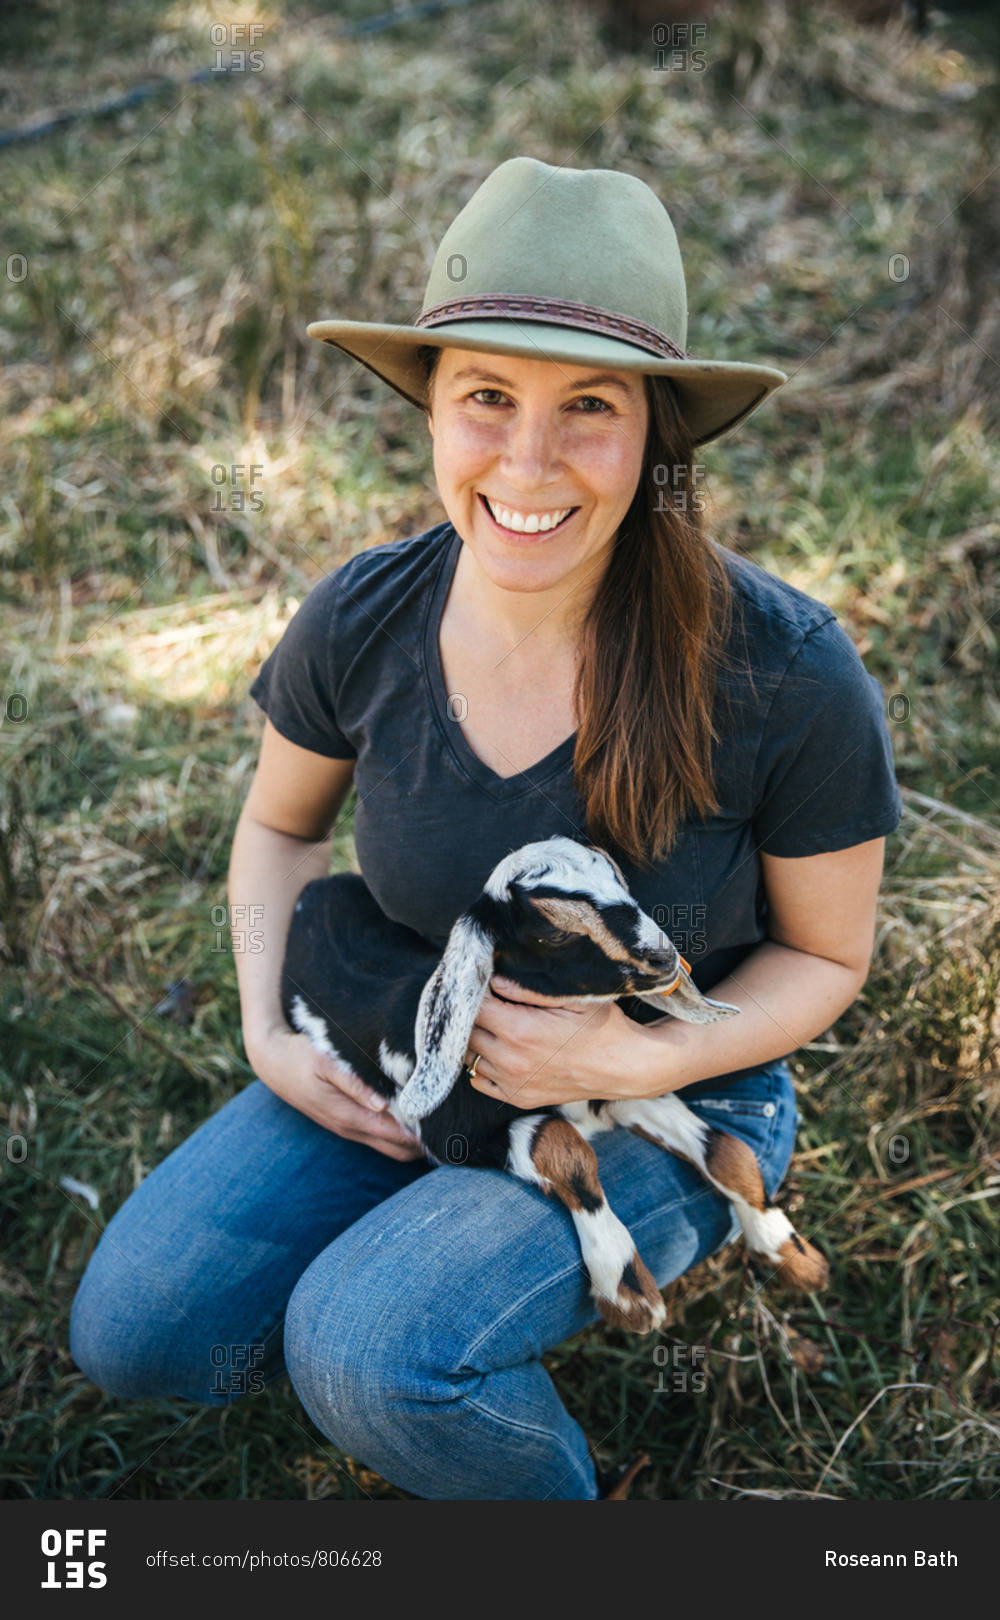 Woman in a hat holding a baby goat.